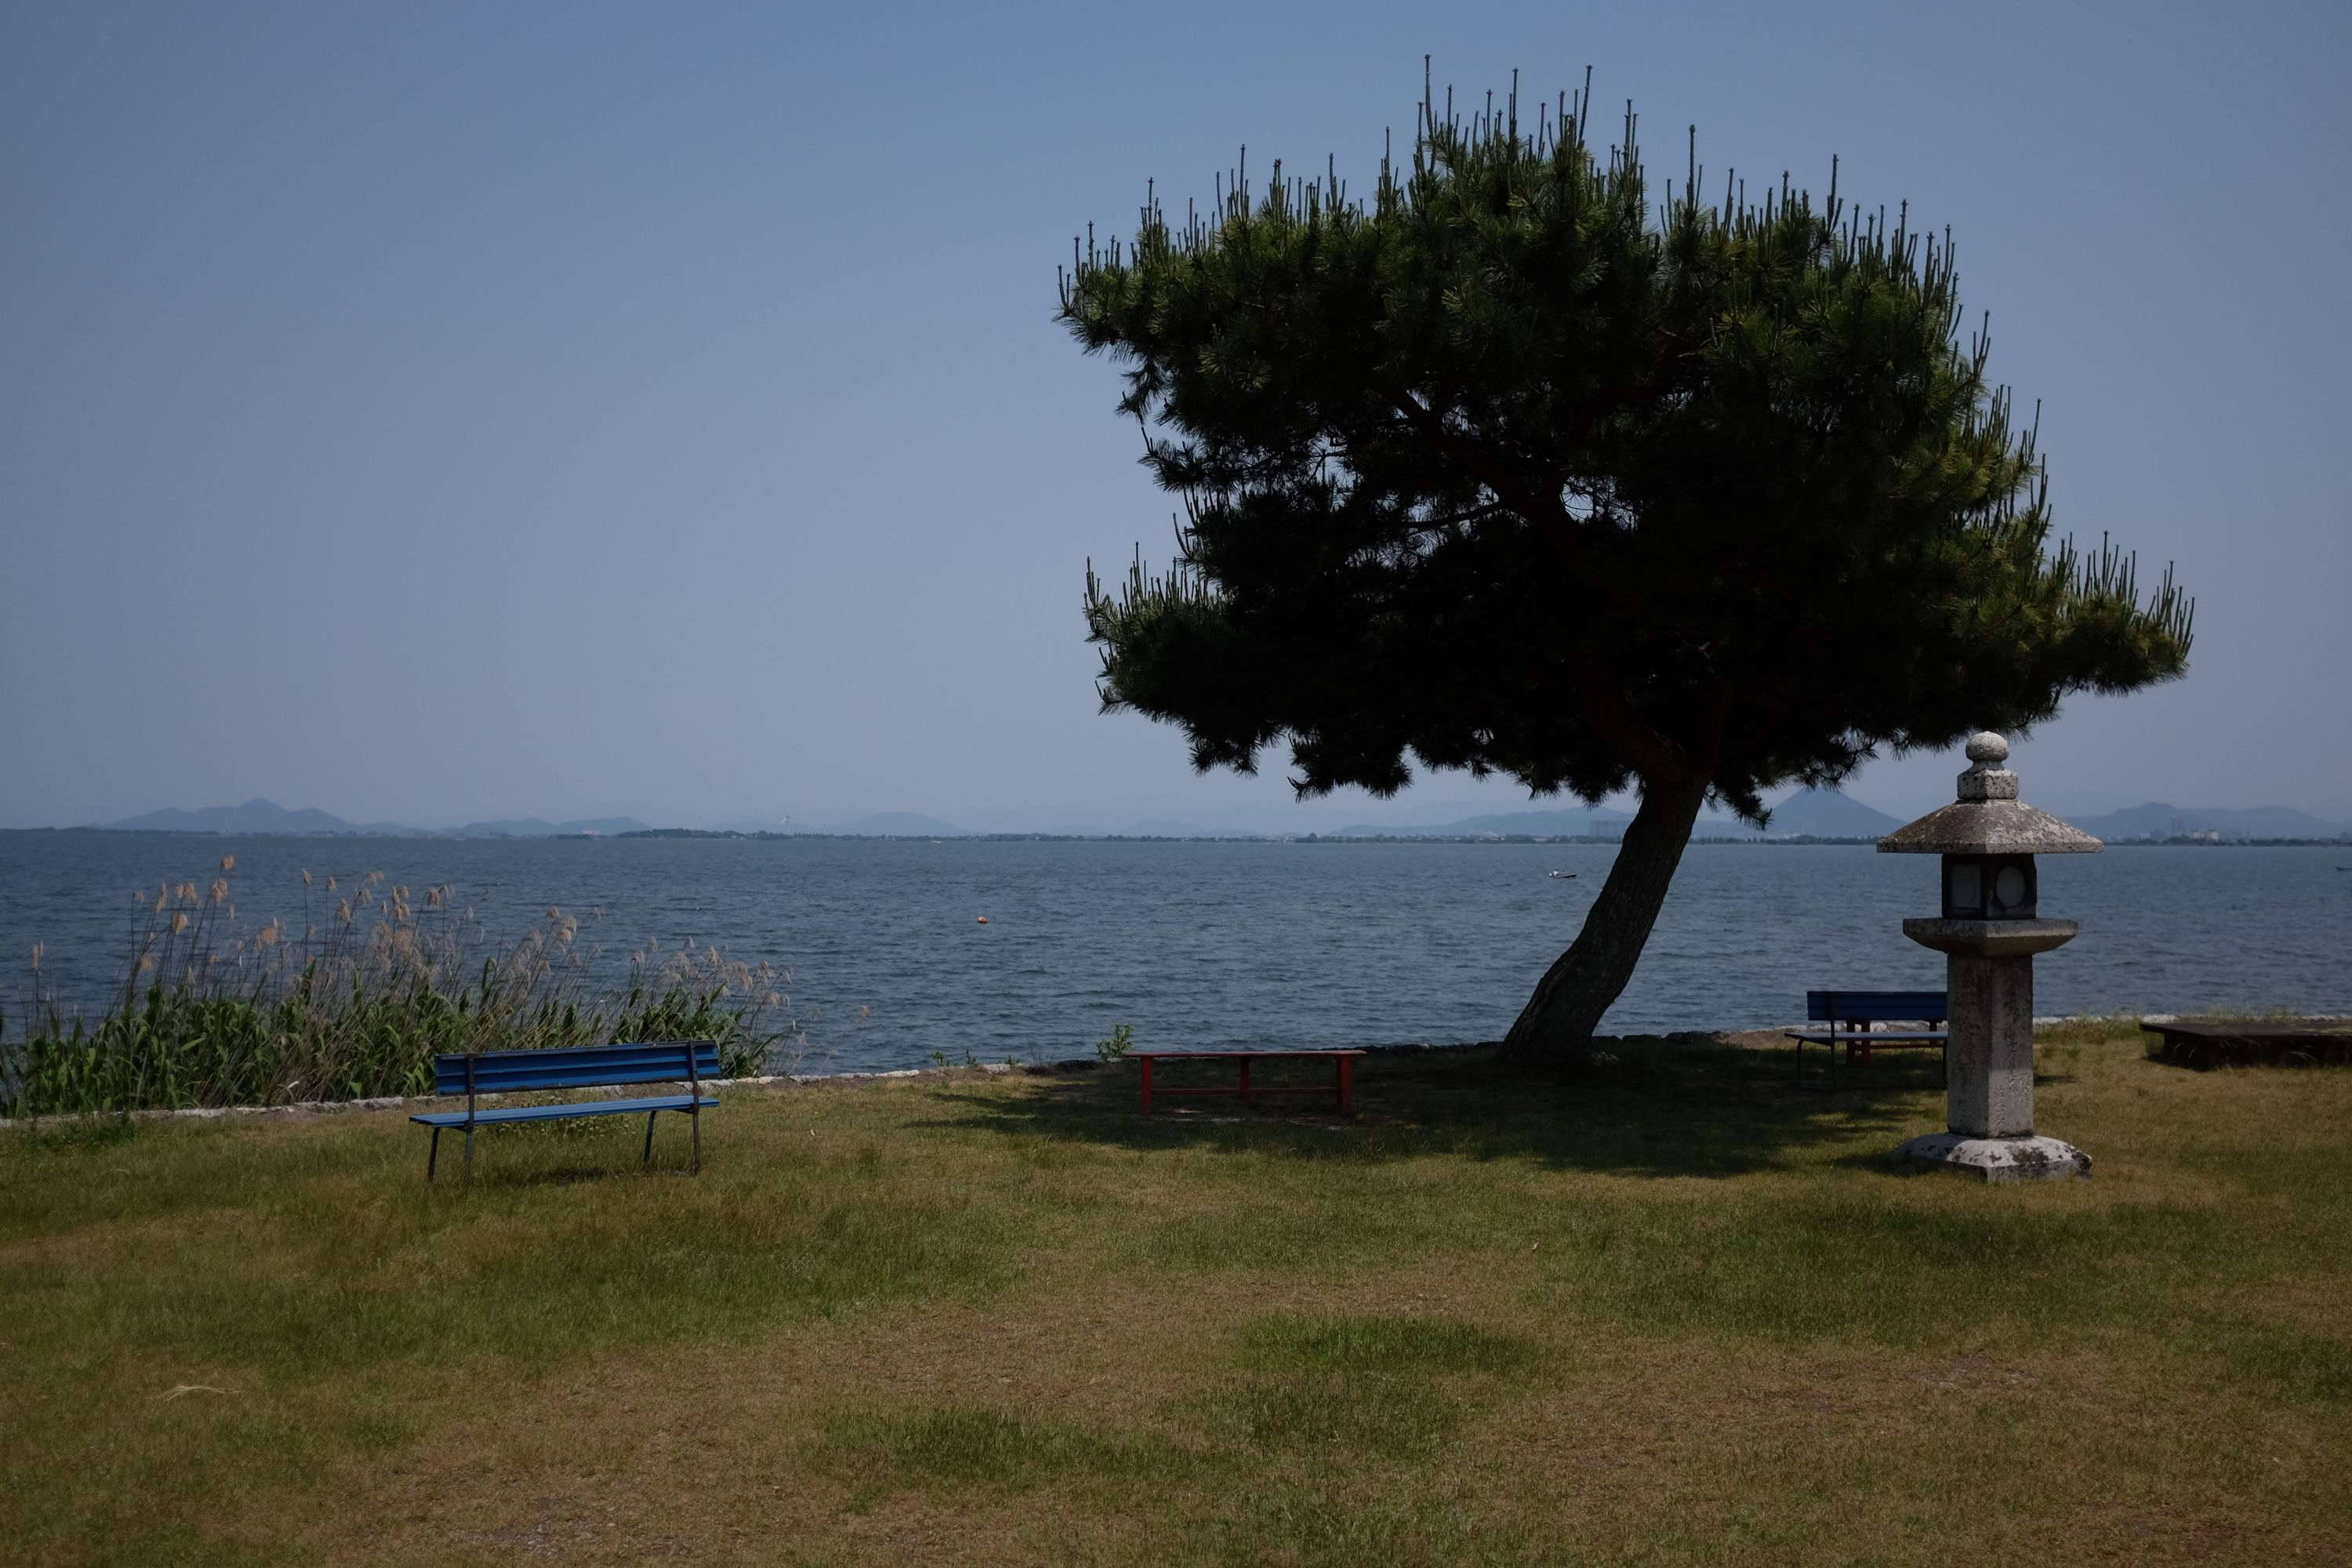 A wind-blown pine tree on a lakeshore.